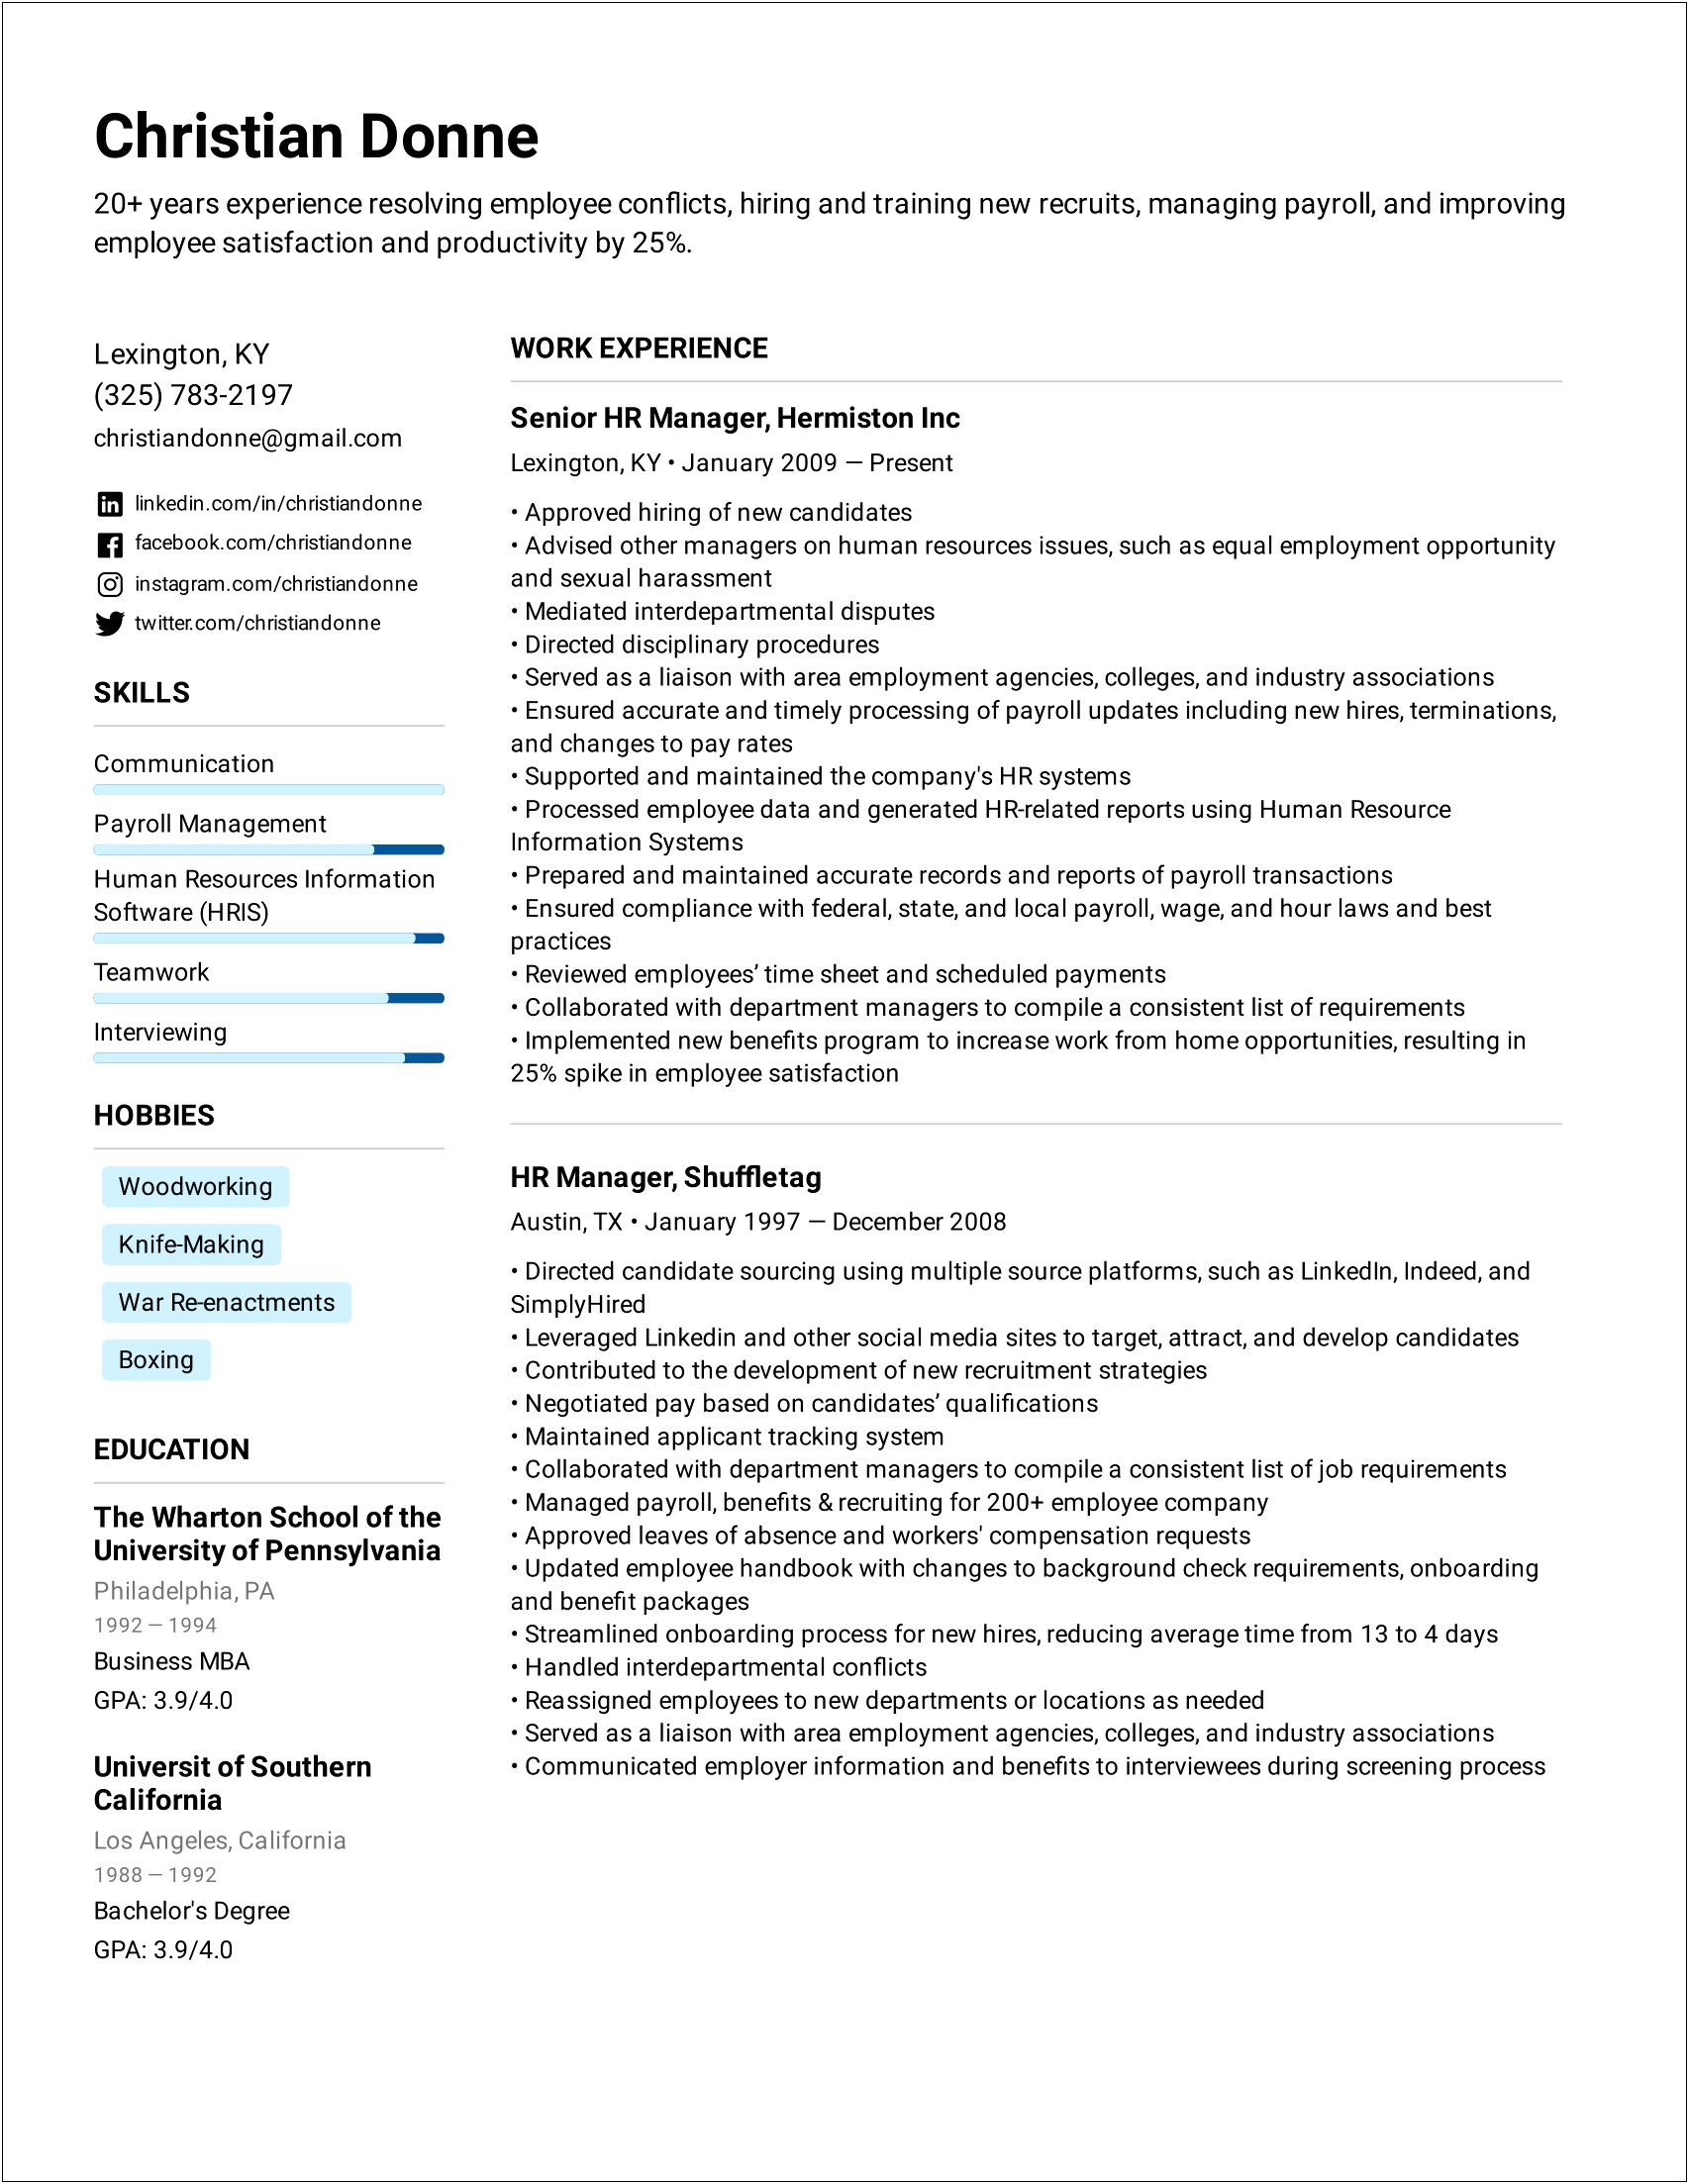 Resume Examples With Skills And Abilities